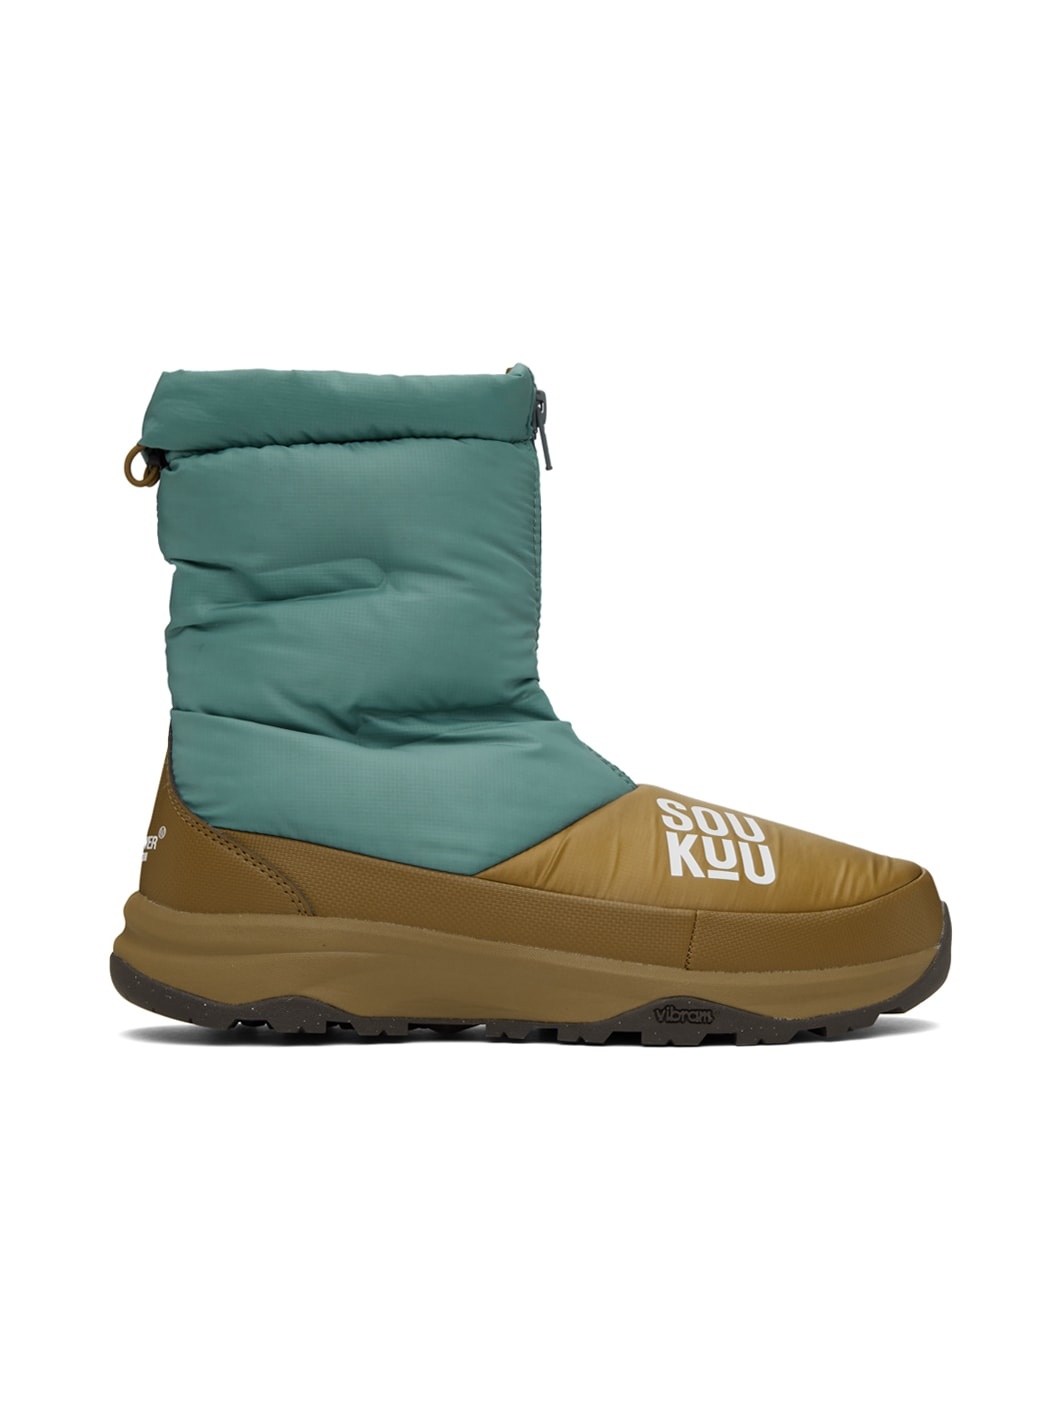 Green & Beige The North Face Edition Soukuu Nuptse Boots